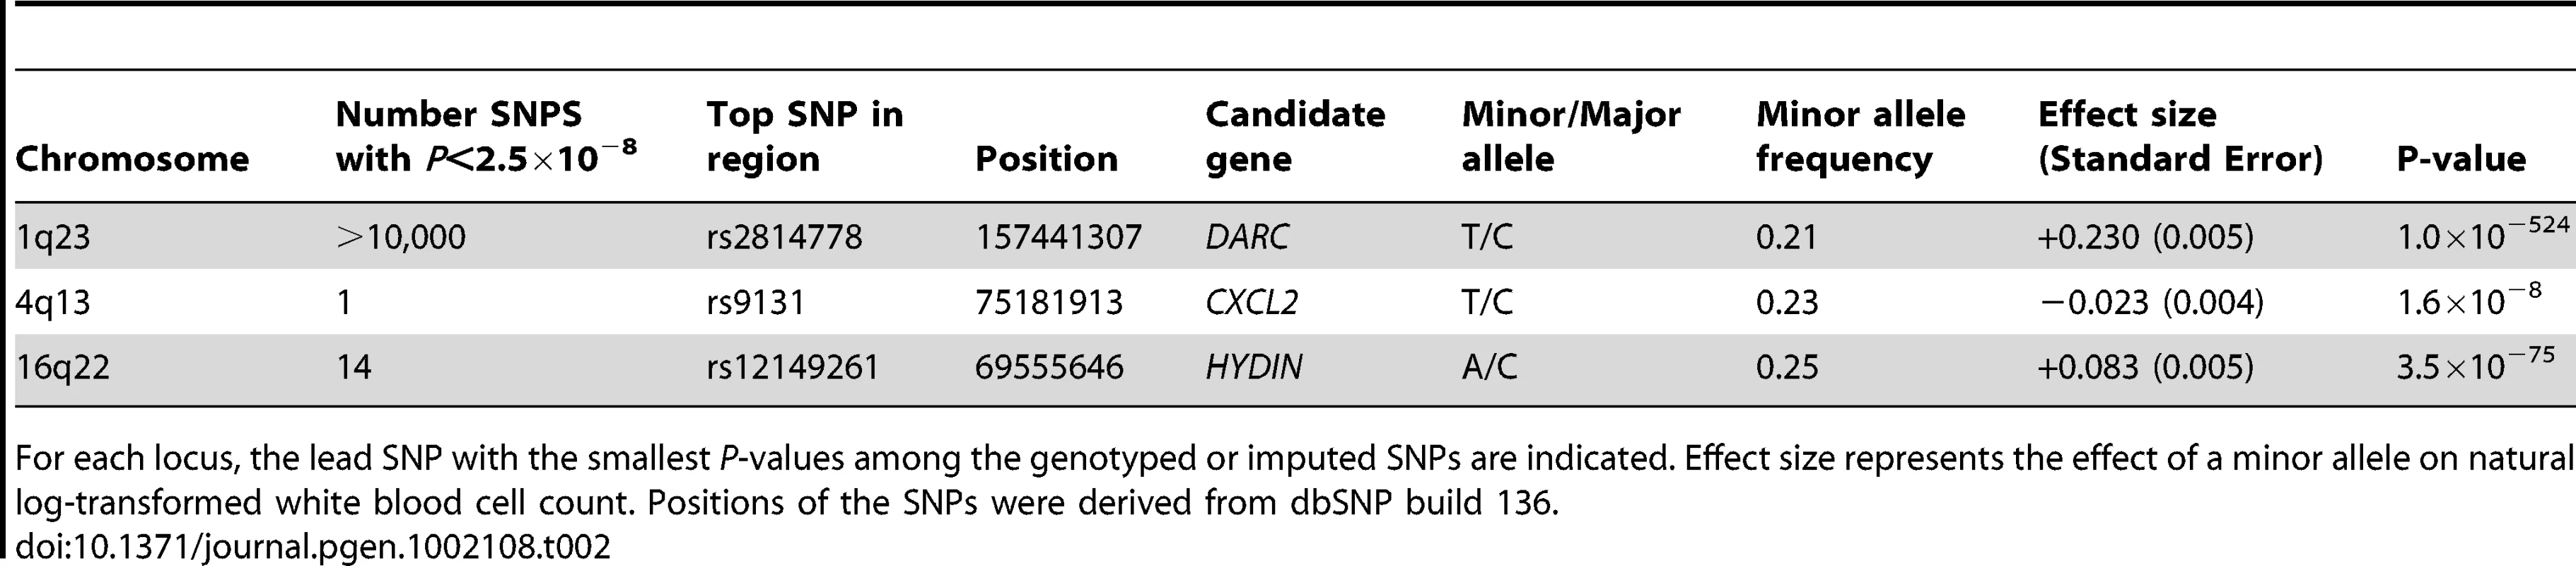 Results of genome-wide significant SNPs for total white blood cell count.